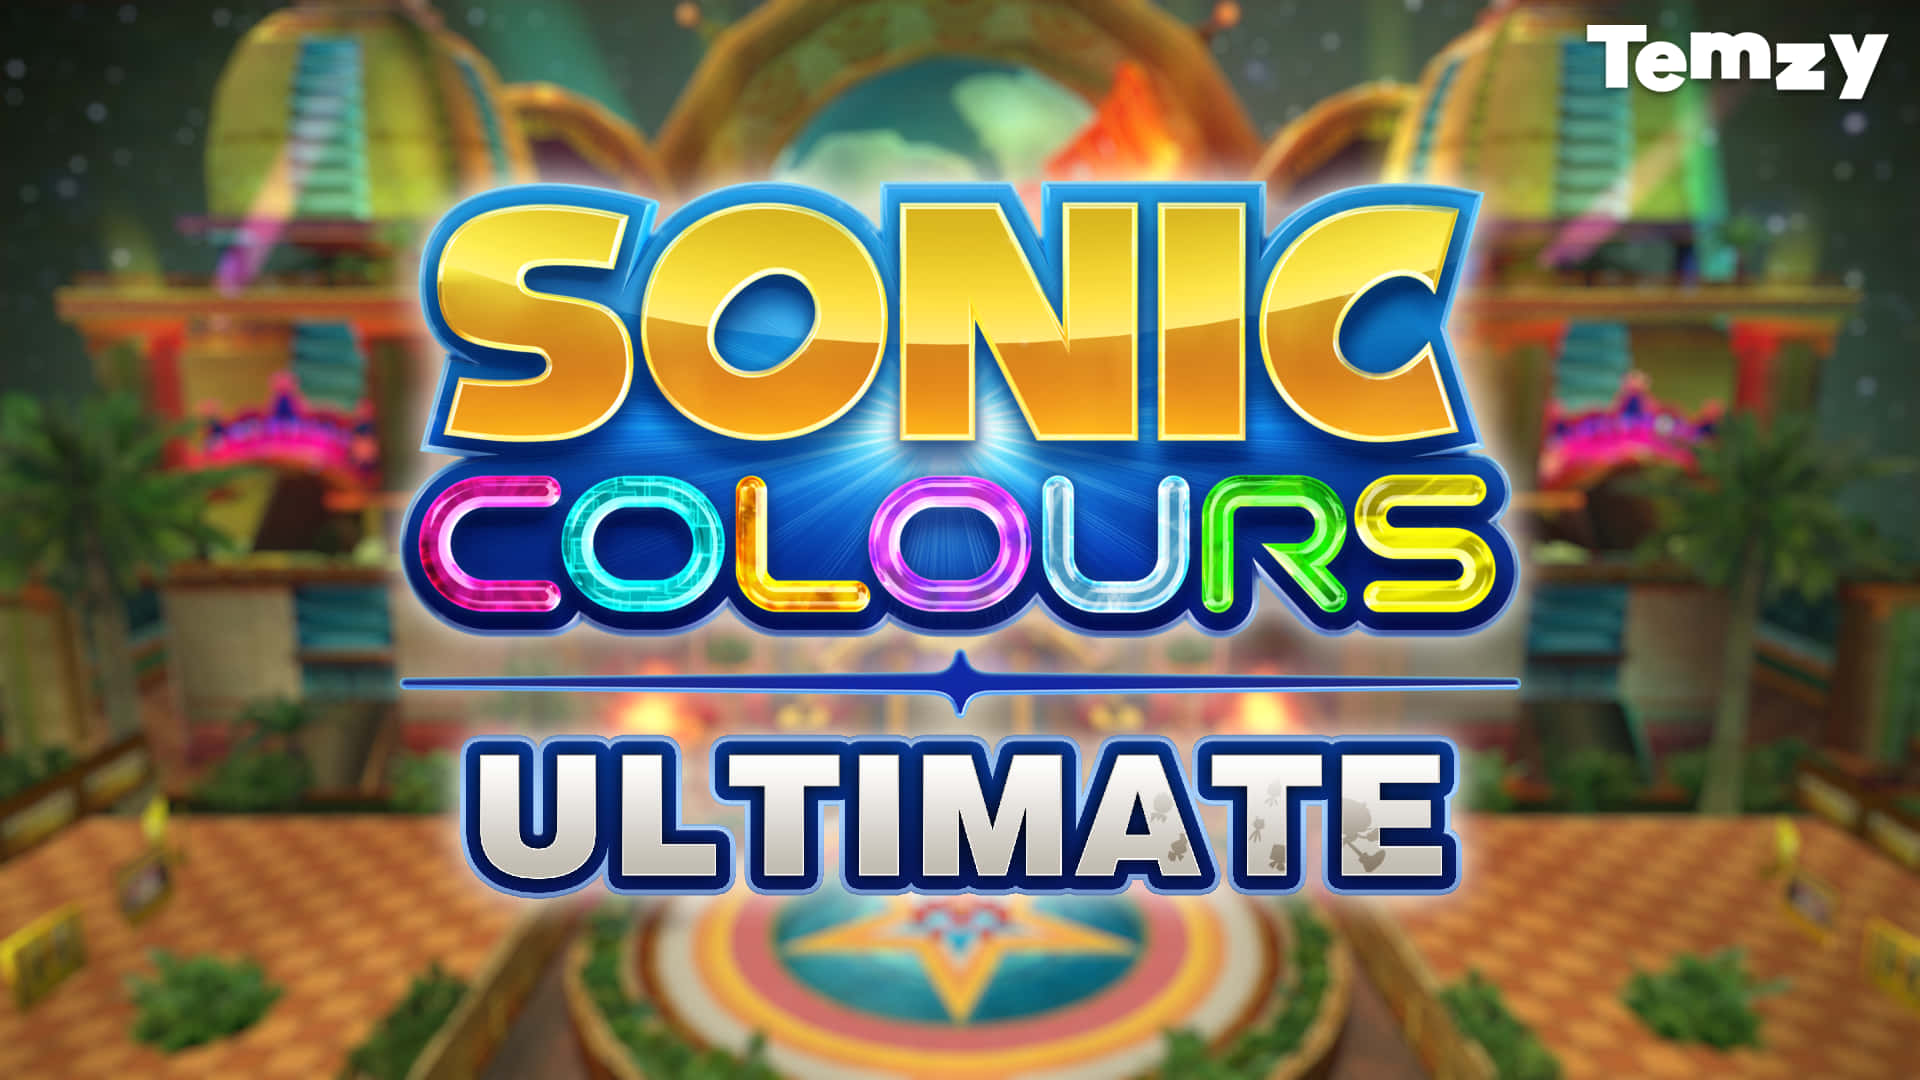 Boost your way through a technicolor wonderland with Sonic Colors! Wallpaper